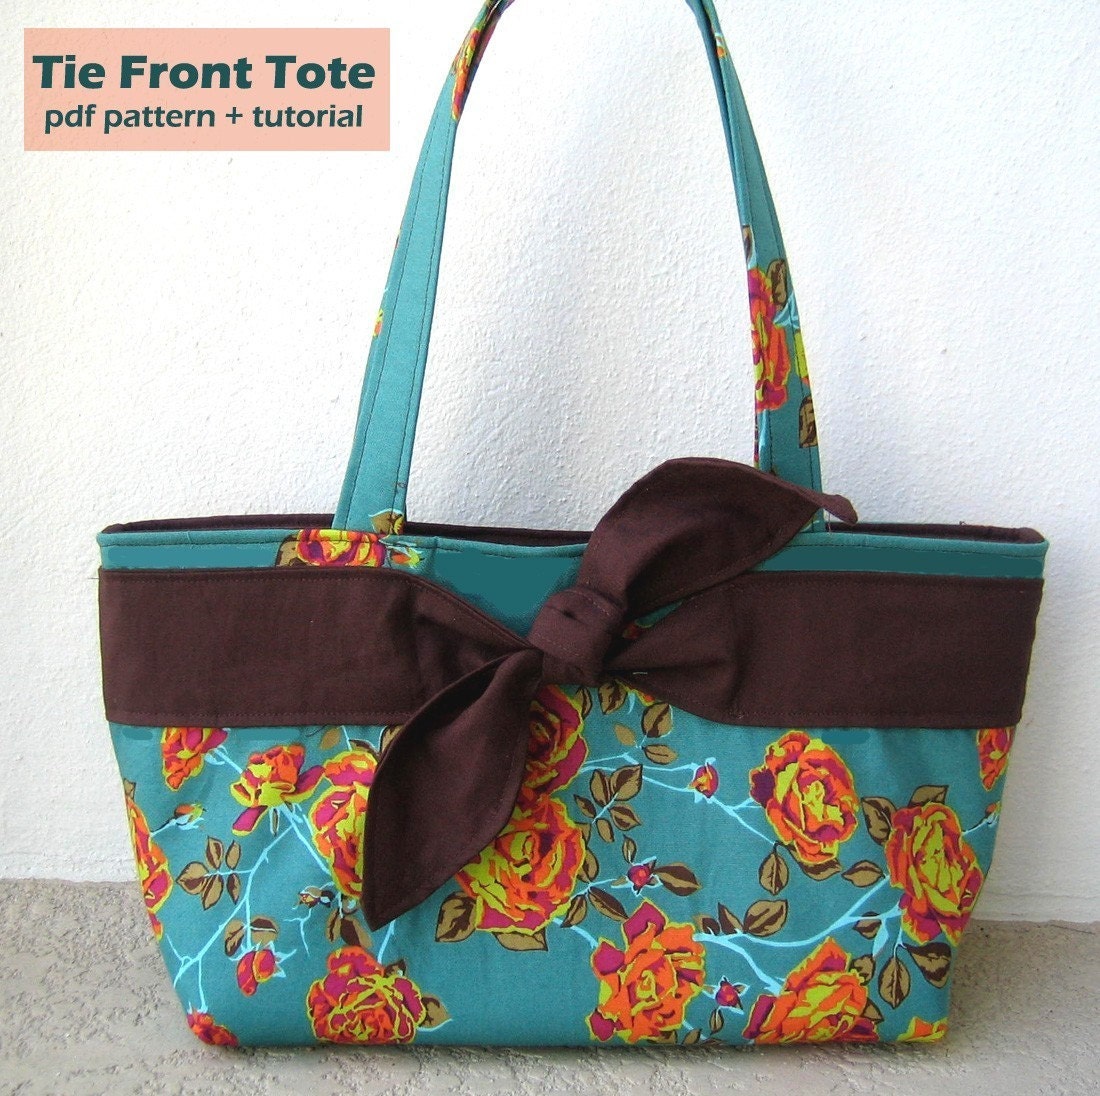 Tie Front Tote Bag PDF Sewing Pattern and Tutorial